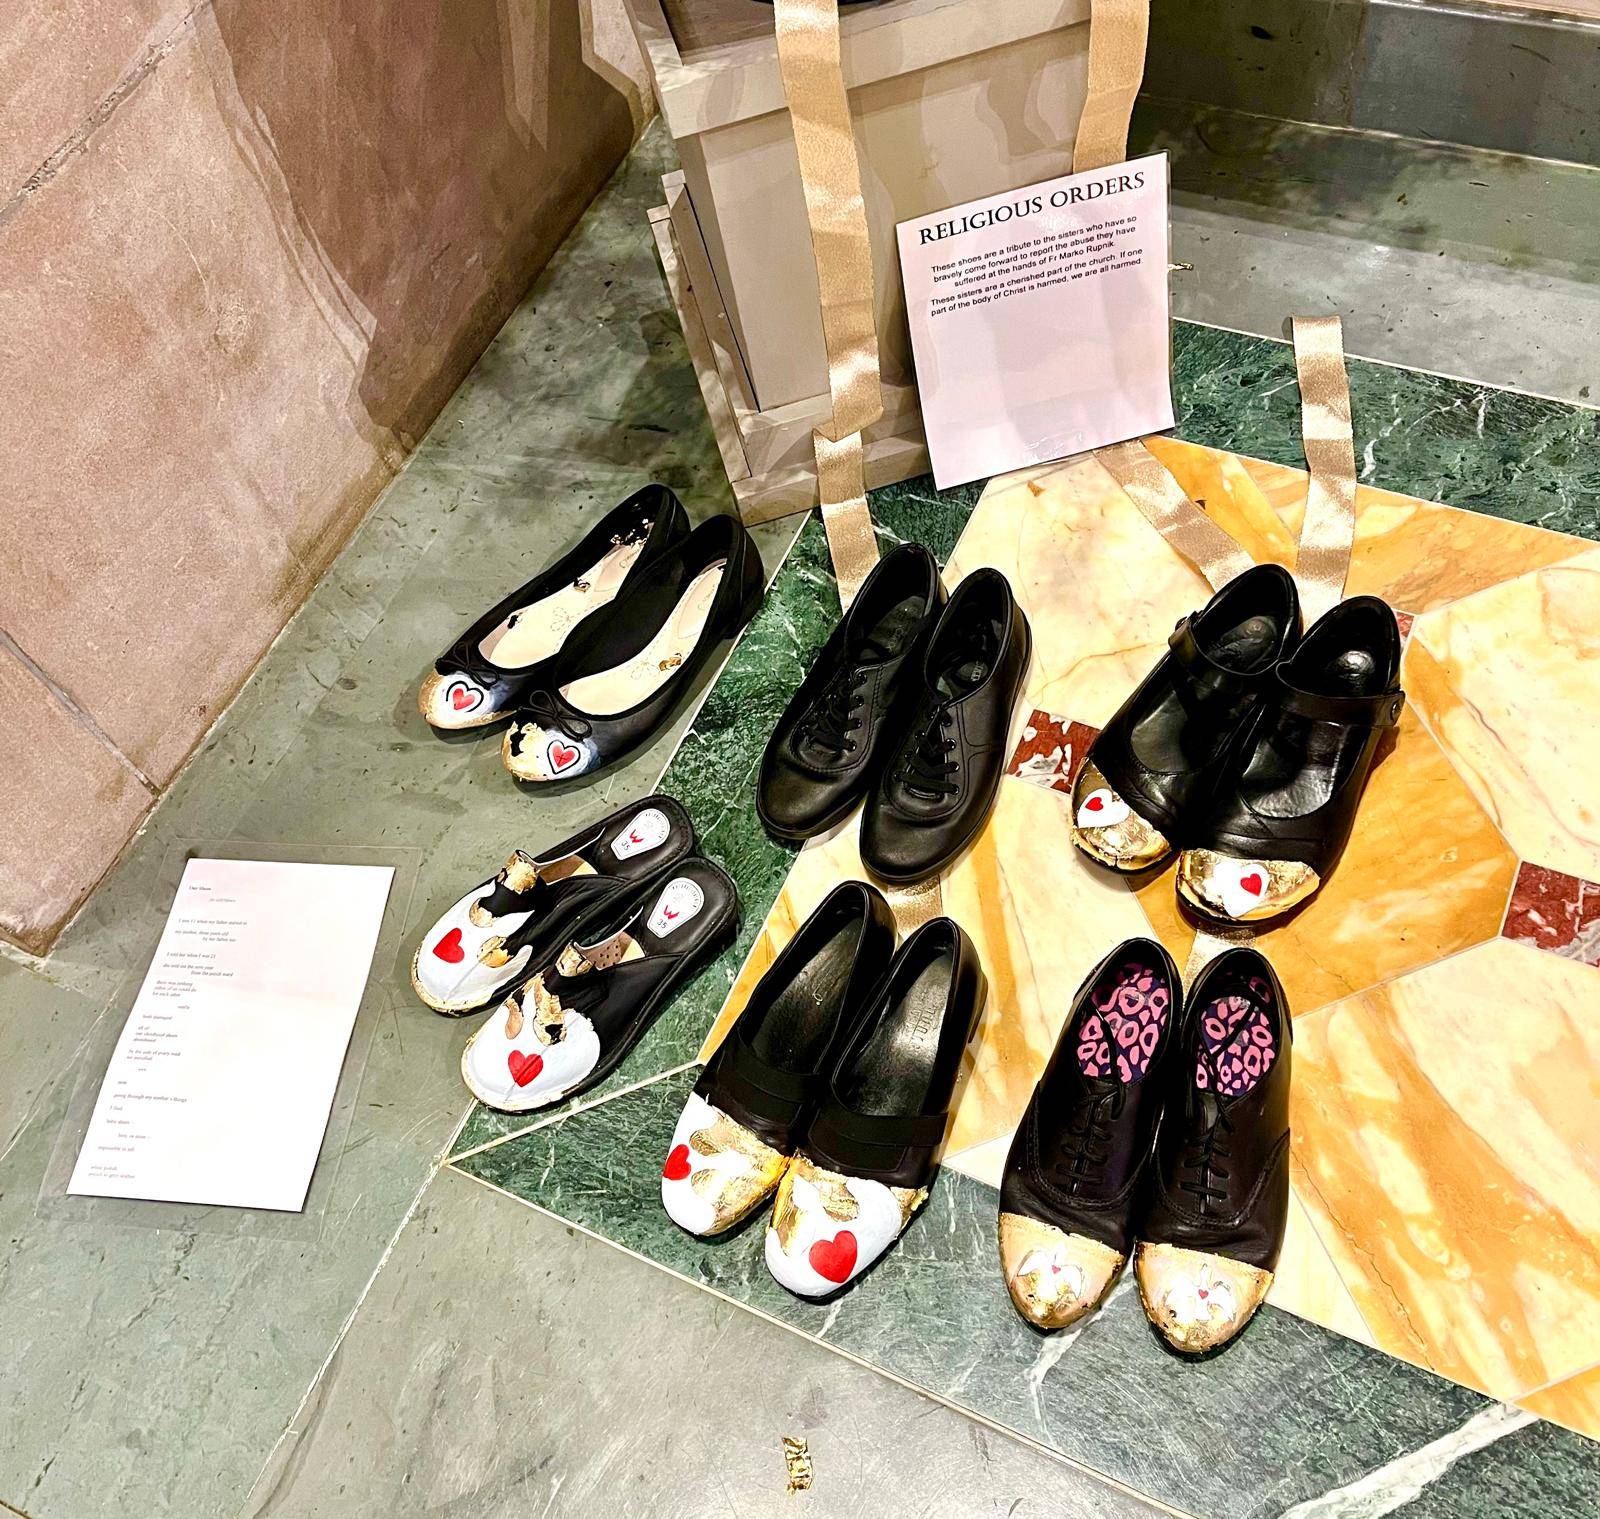 Shoes representing victims of Fr. Marko Rupnik, part of the LOUDfence advocacy organization's inaugural "Walk in my shoes" installation at St. Joseph's Cathedral, Wheeling, W-Va. on Sunday, 7 April 2024. (Credit: Photo courtesy of LOUDfence / Antonia Sobocki.)